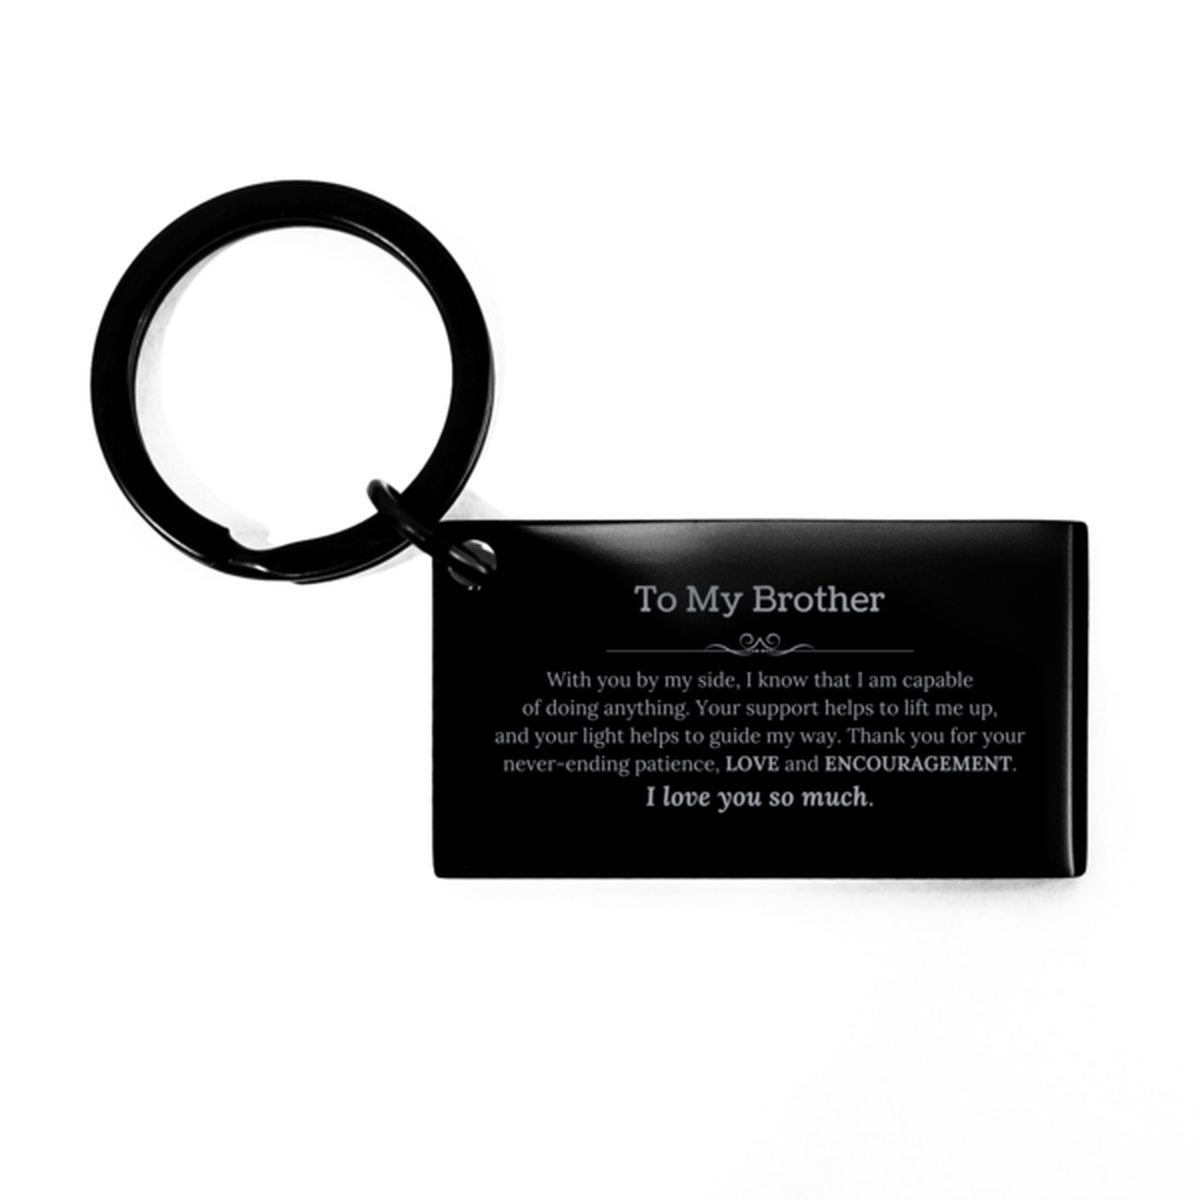 Appreciation Brother Keychain Gifts, To My Brother Birthday Christmas Wedding Keepsake Gifts for Brother With you by my side, I know that I am capable of doing anything. I love you so much